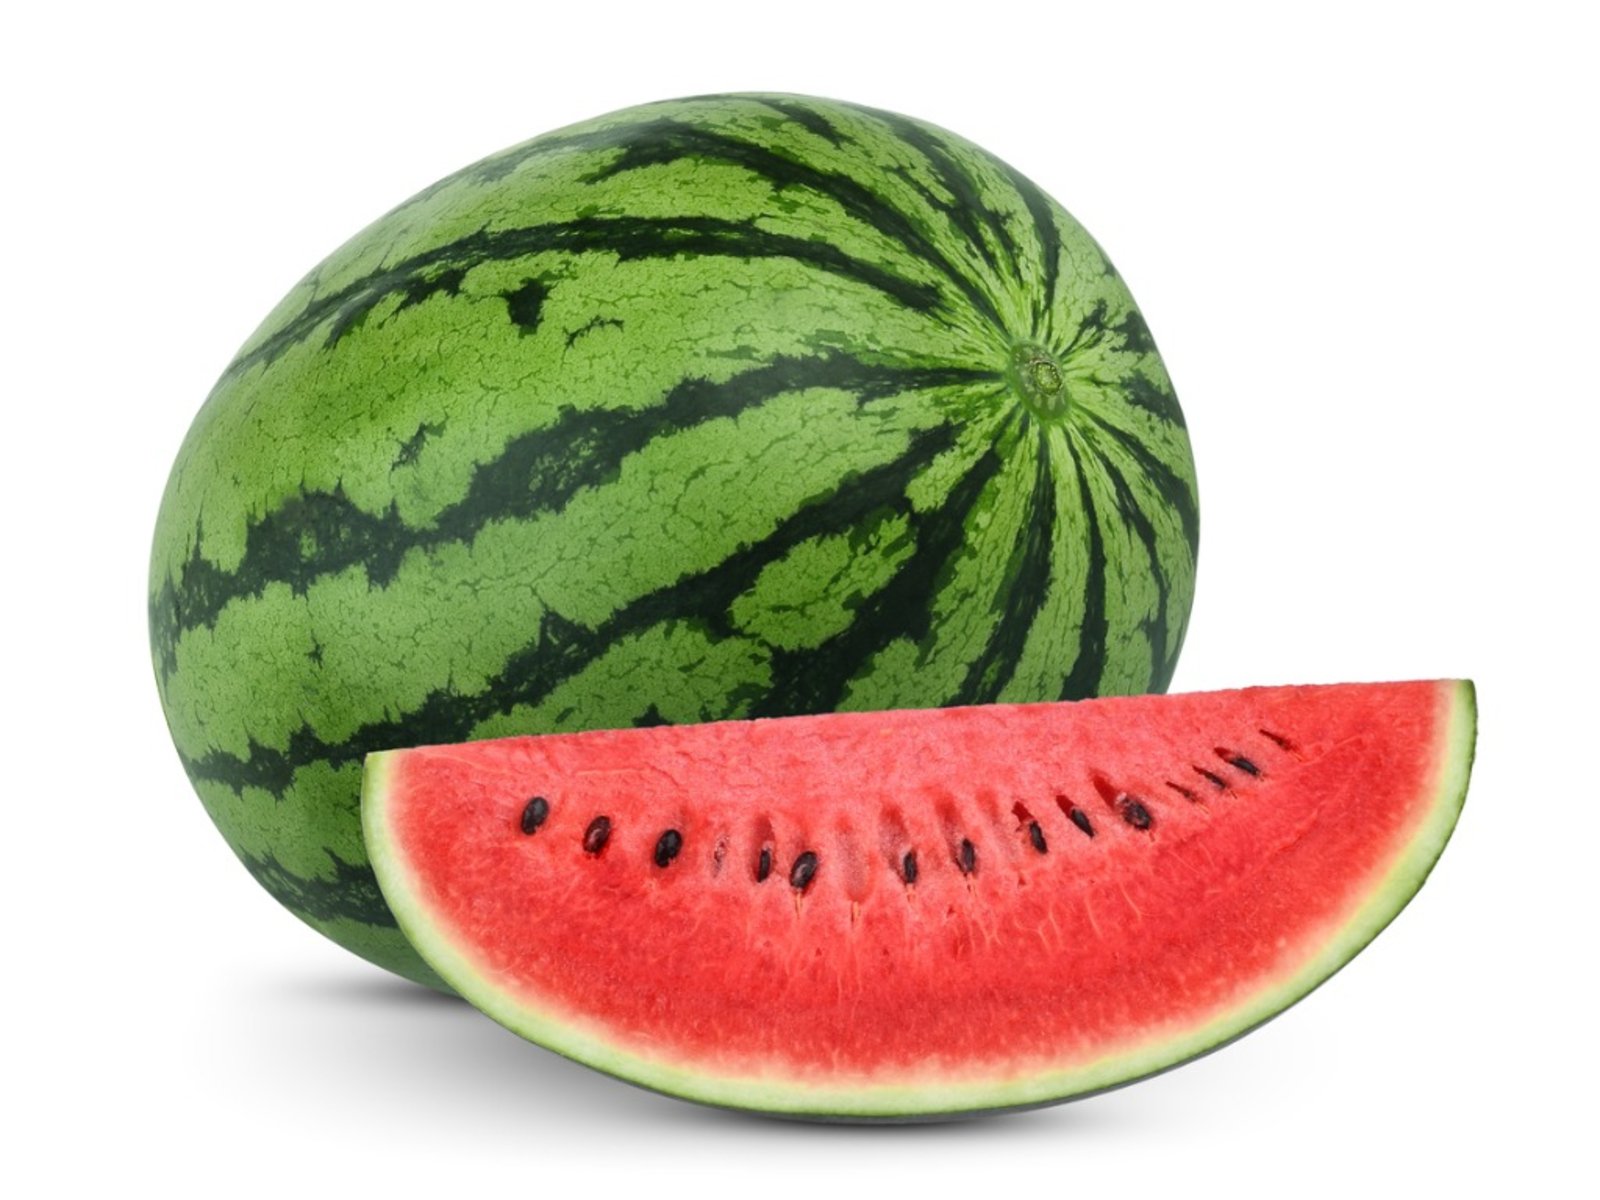 Watermelon - Best Fruits And Vegetables For Dogs To Eat